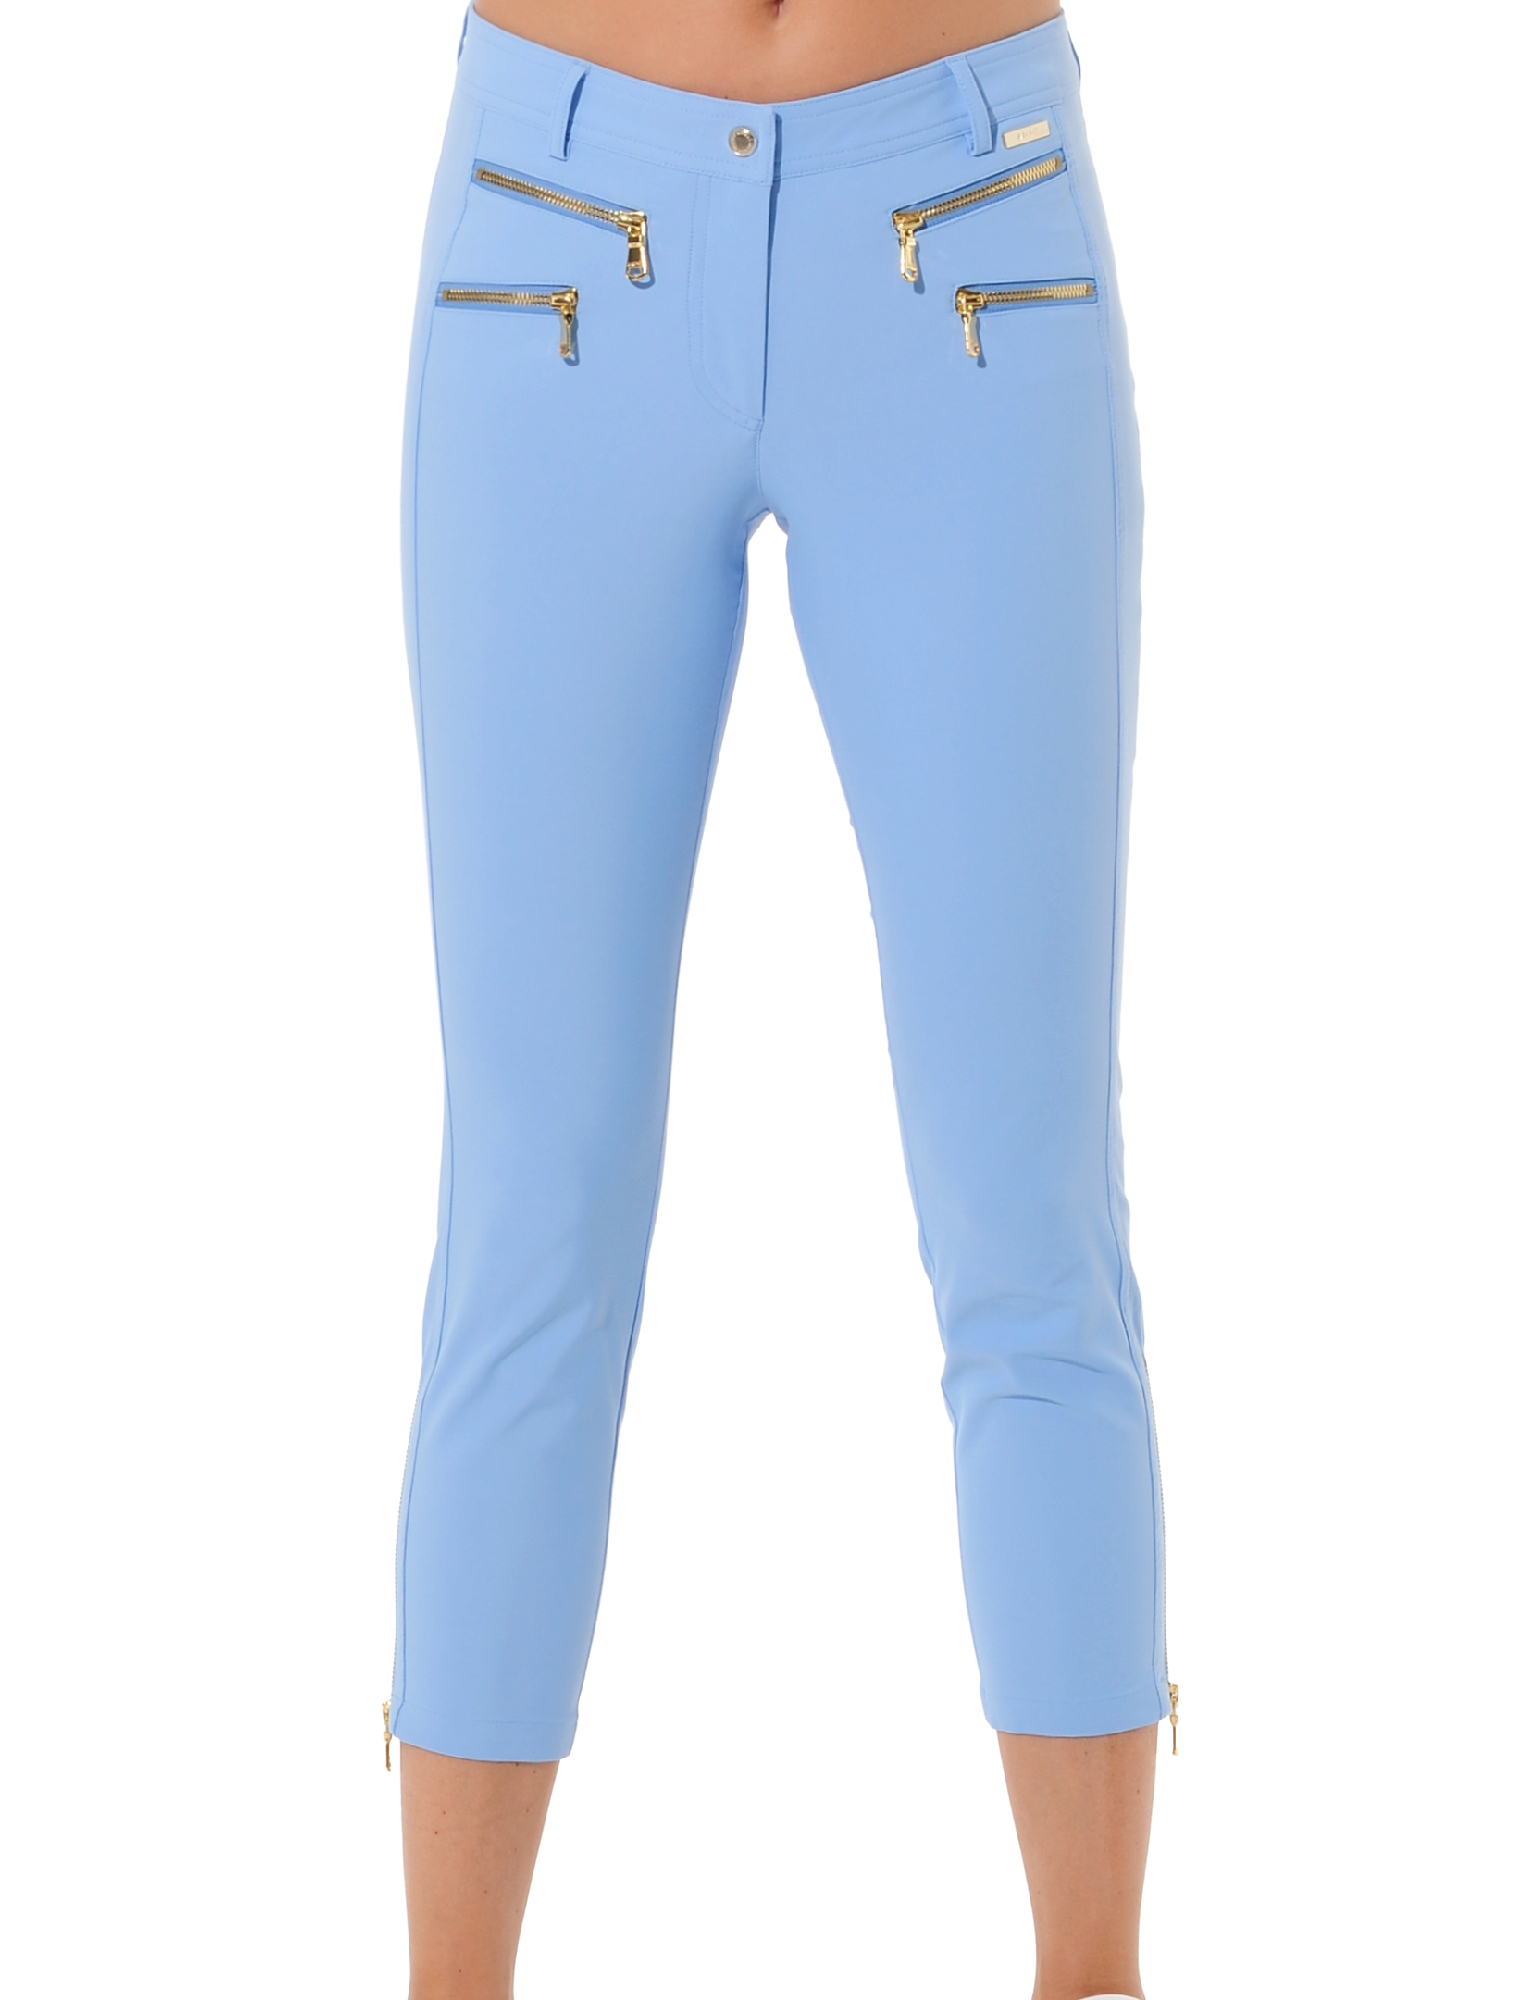 4way stretch shiny gold double zip cropped pants baby blue 